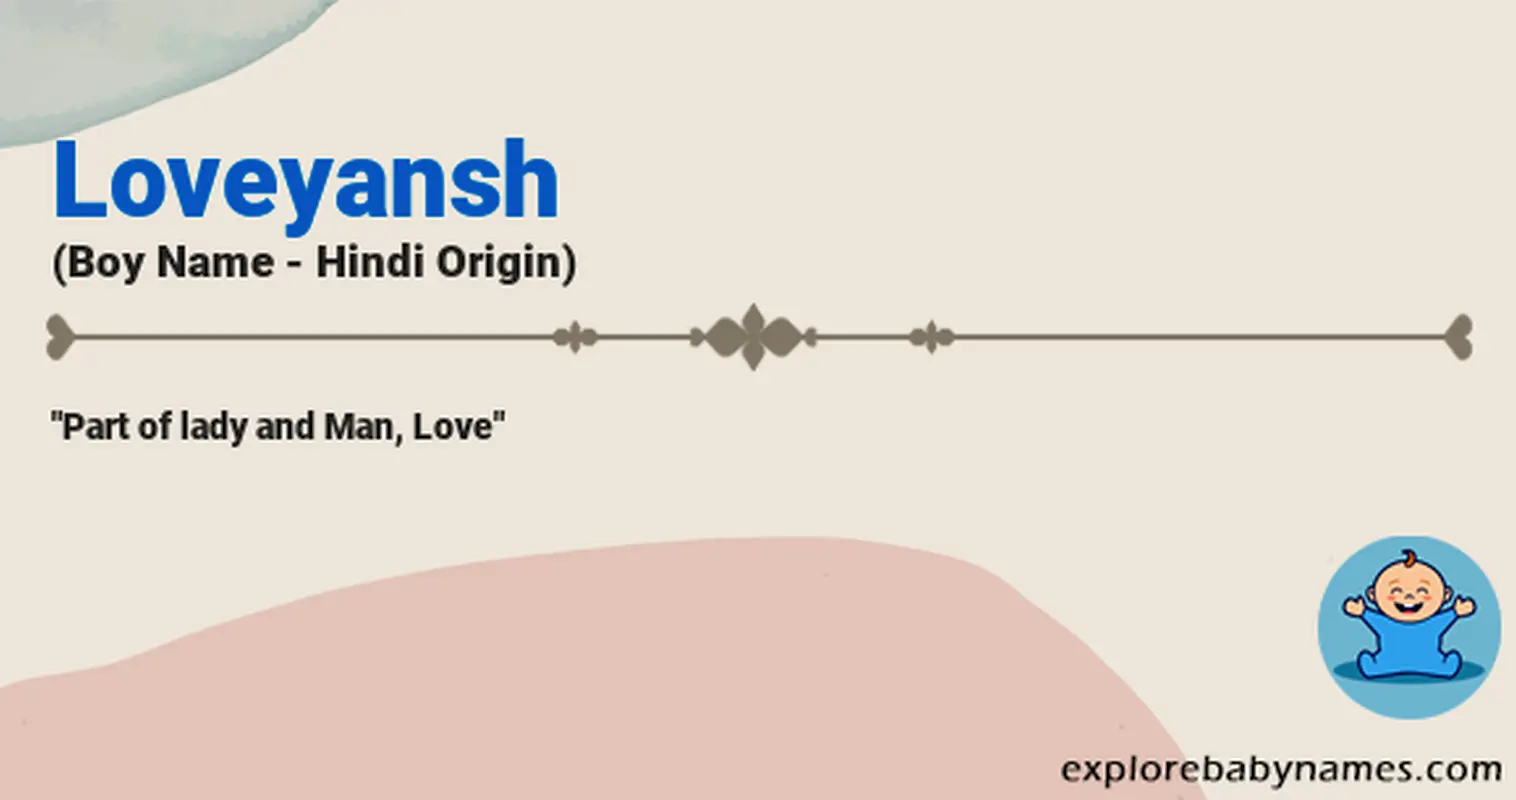 Meaning of Loveyansh